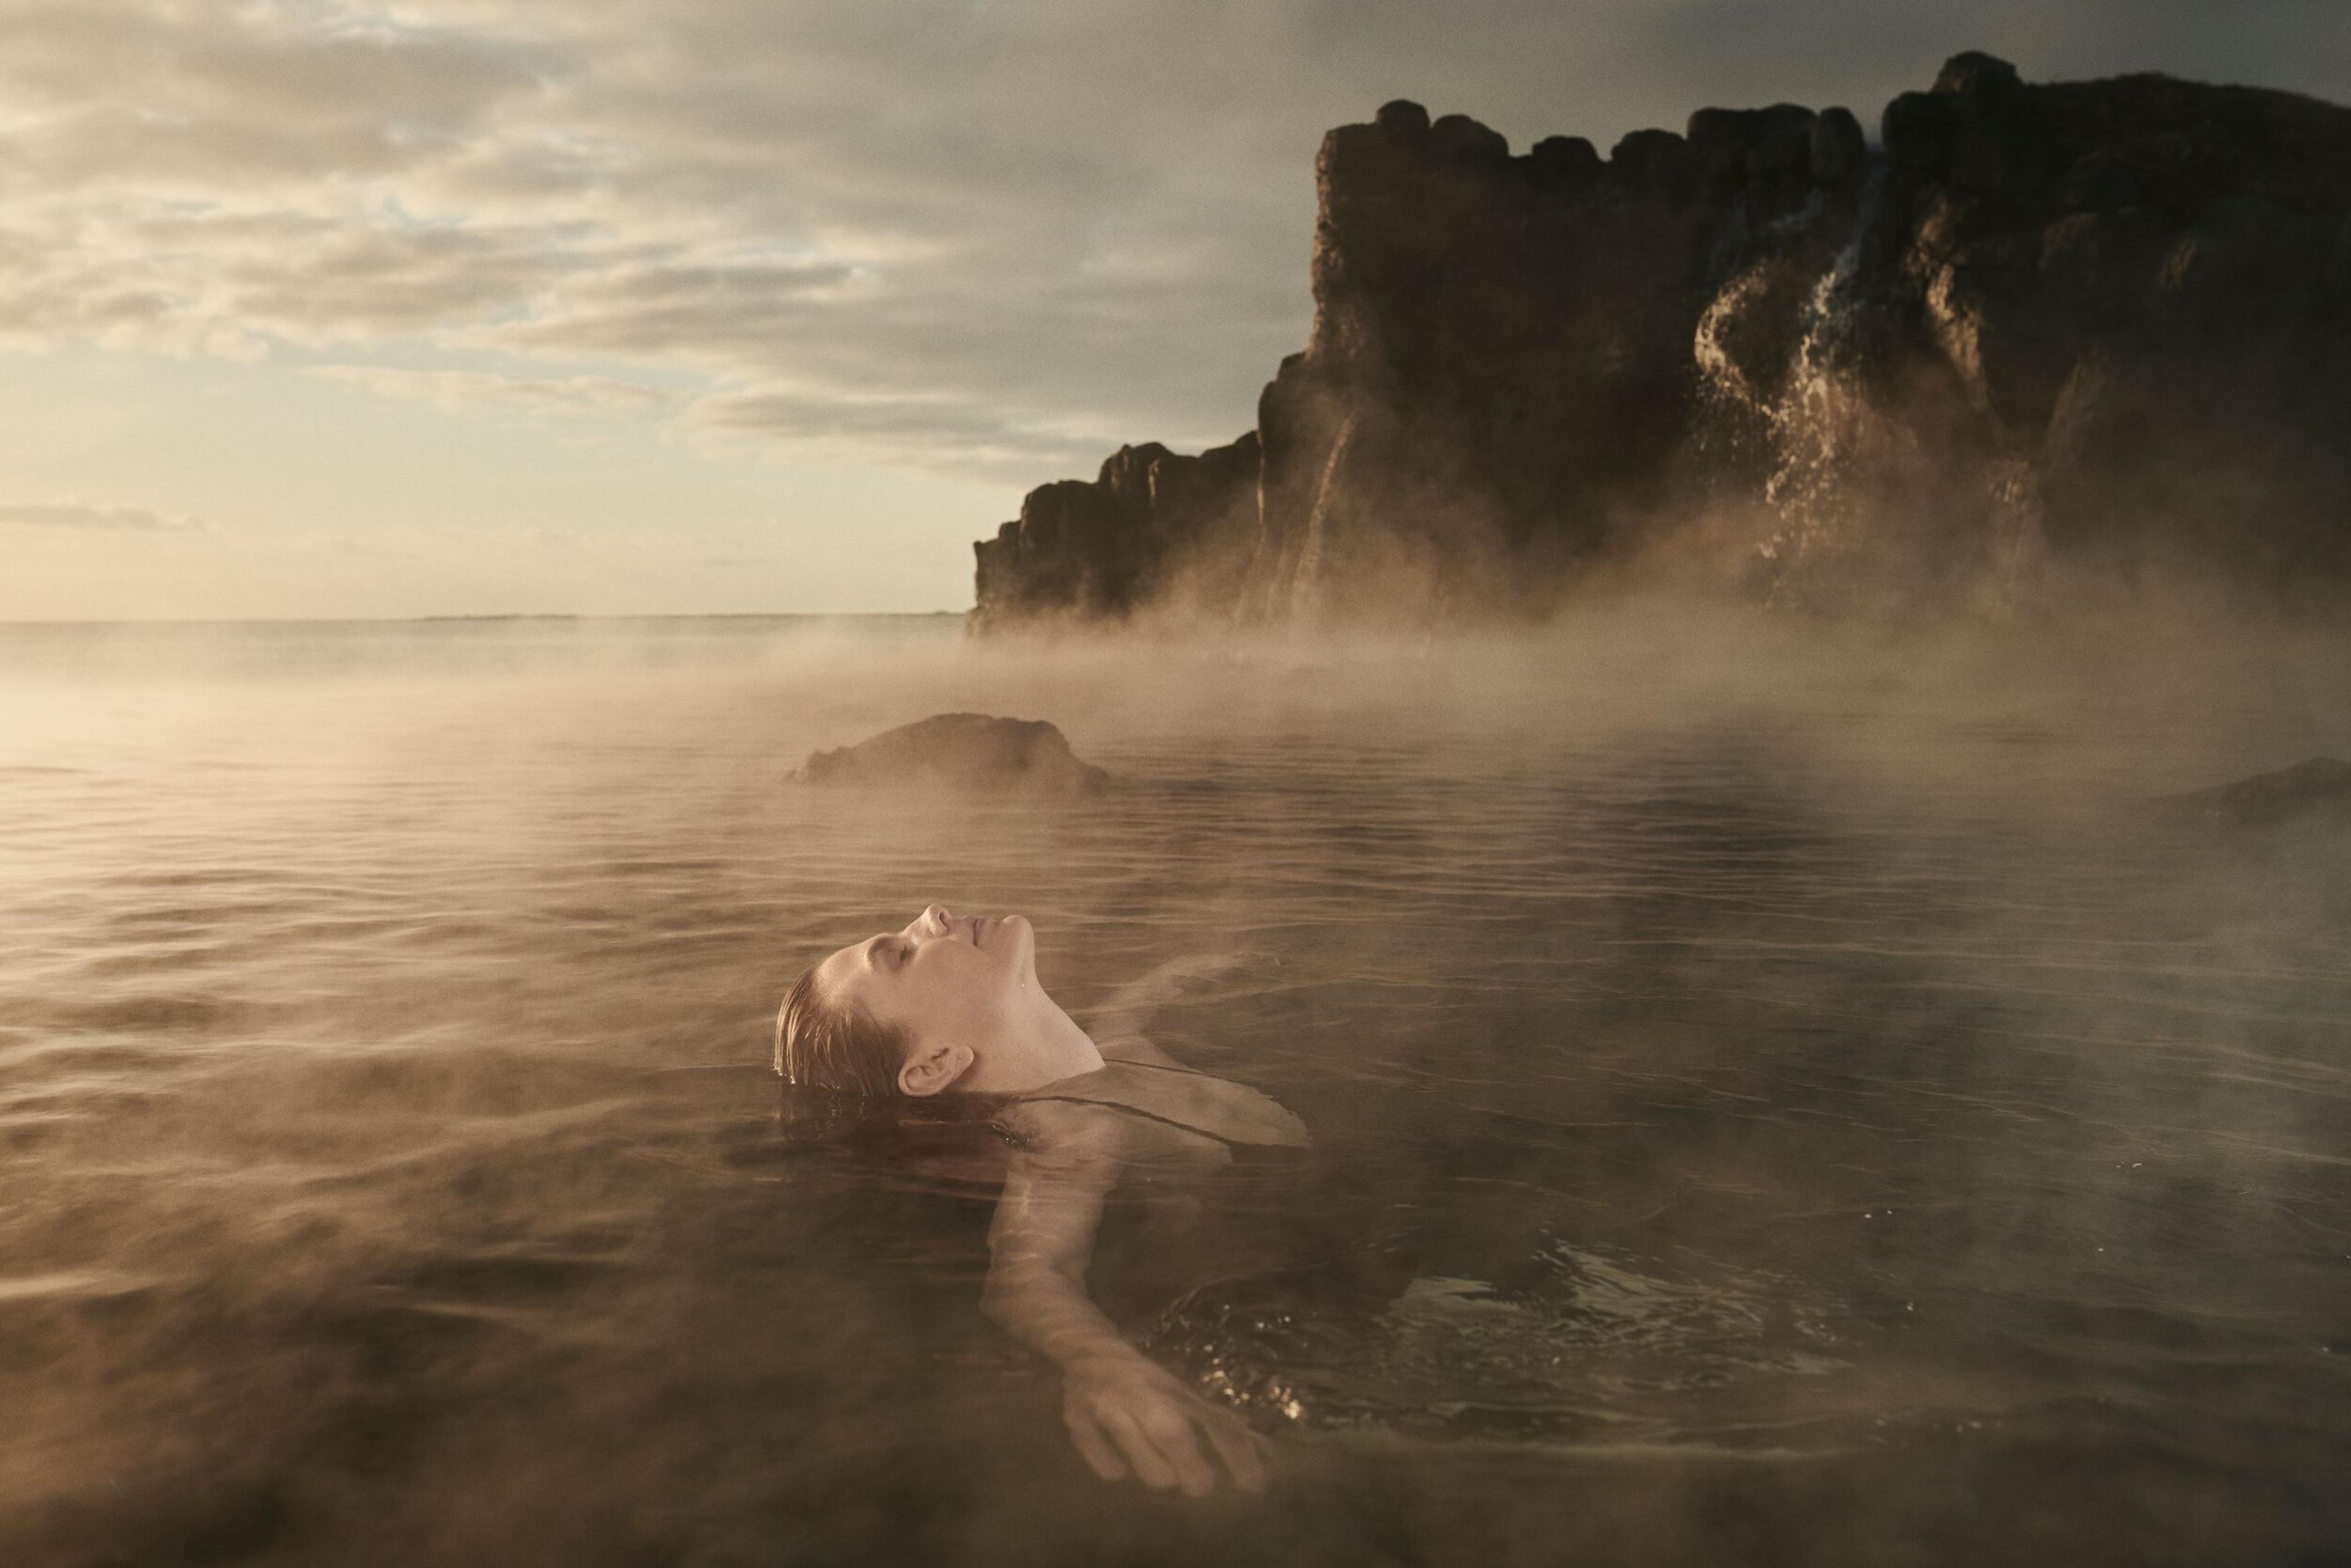 Woman floating peacefully in geothermal waters, bathed in the golden glow of sunset.